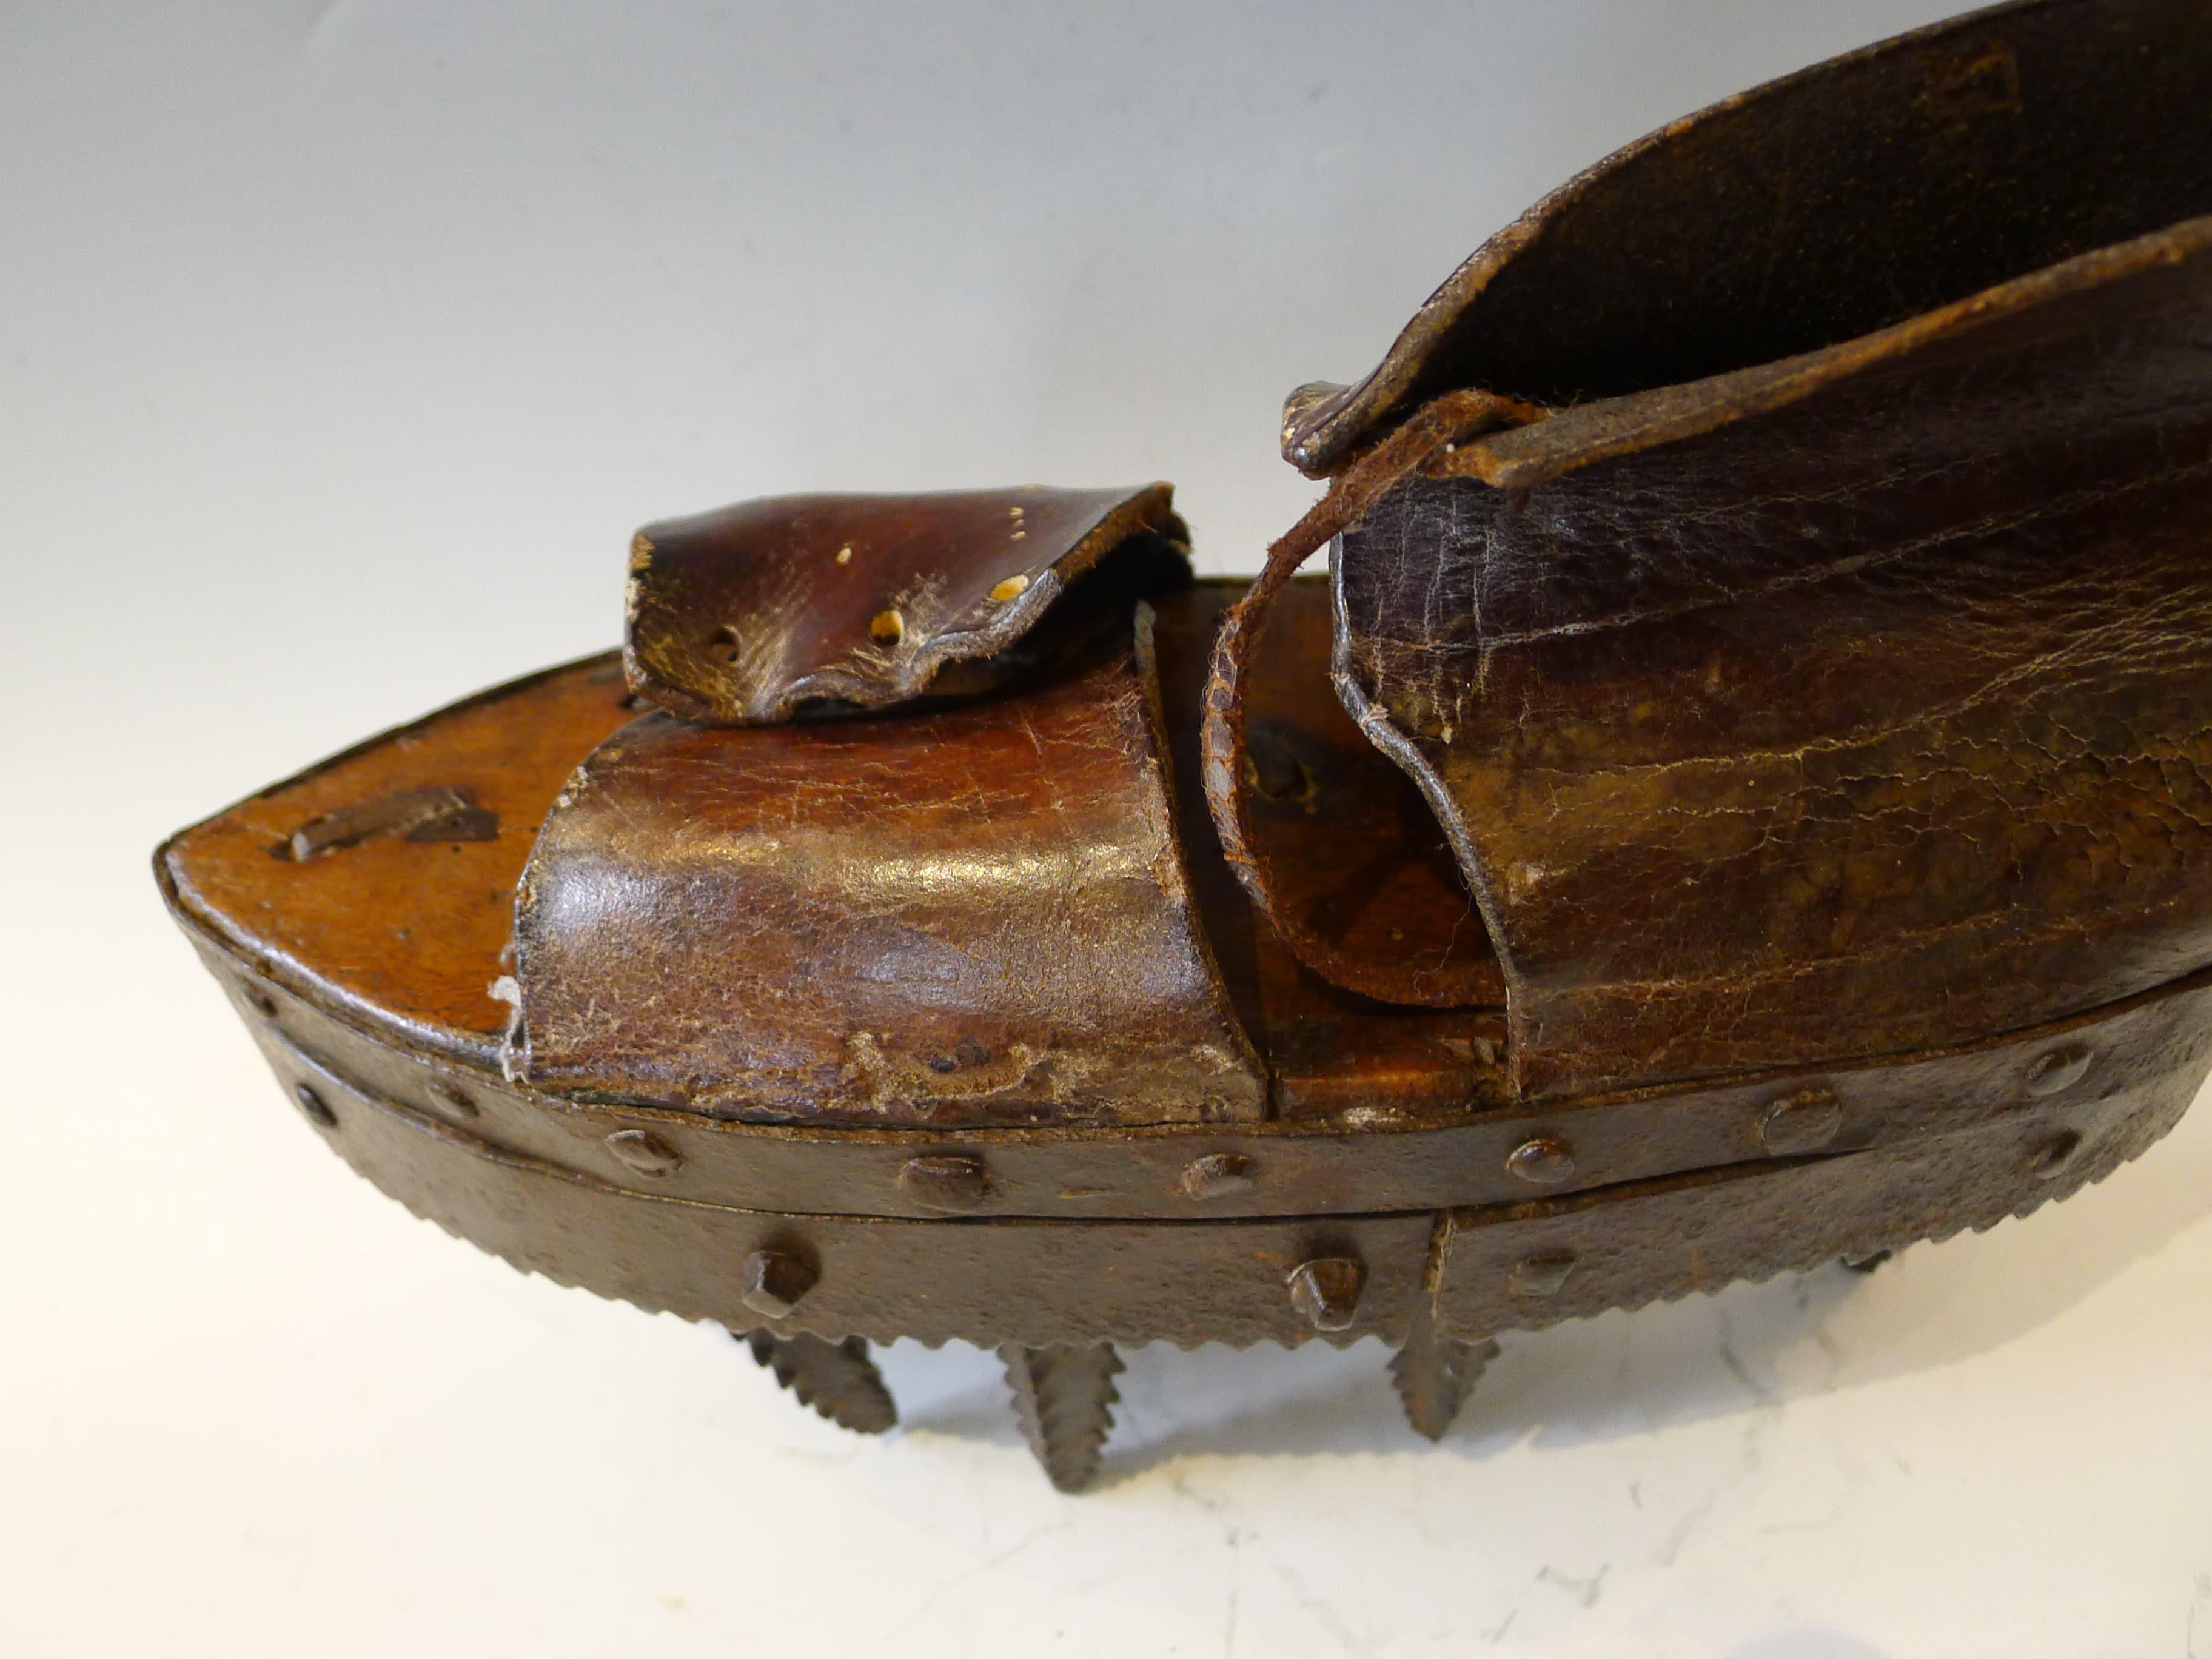 Incredible Shoes to Break Sweet Chestnuts, 19th Century (Gebrannt)